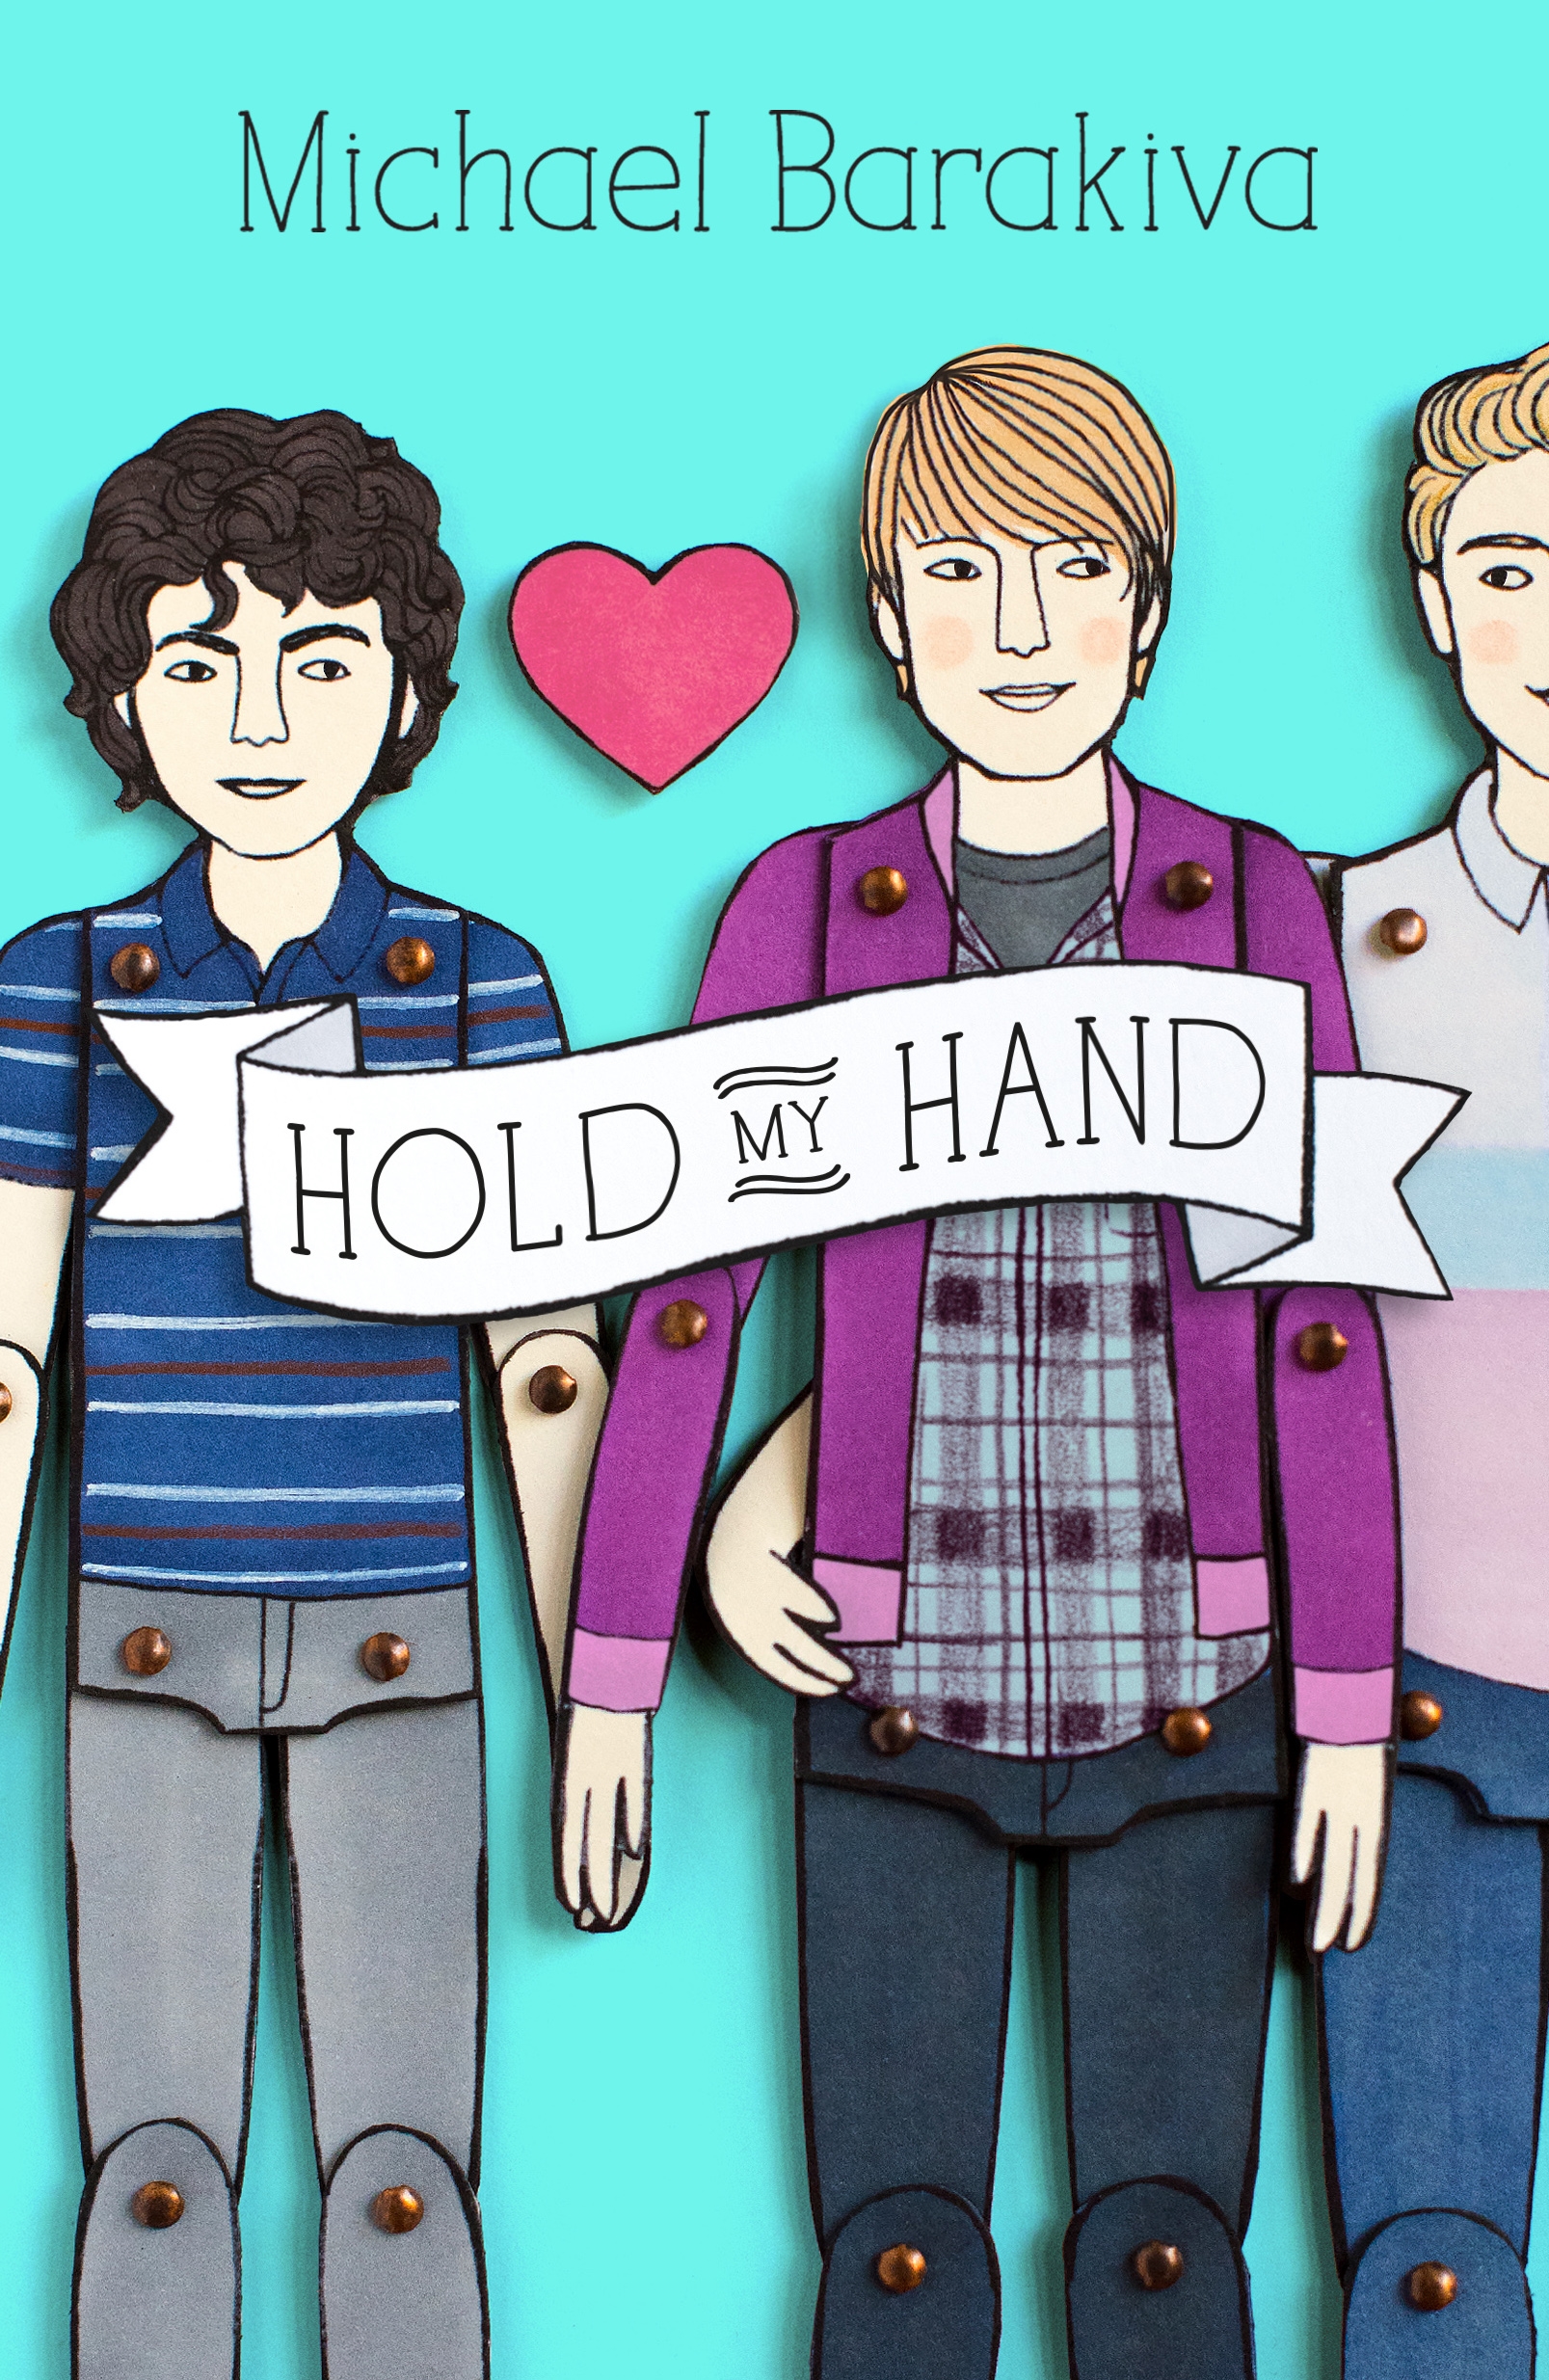 Book Hold My Hand